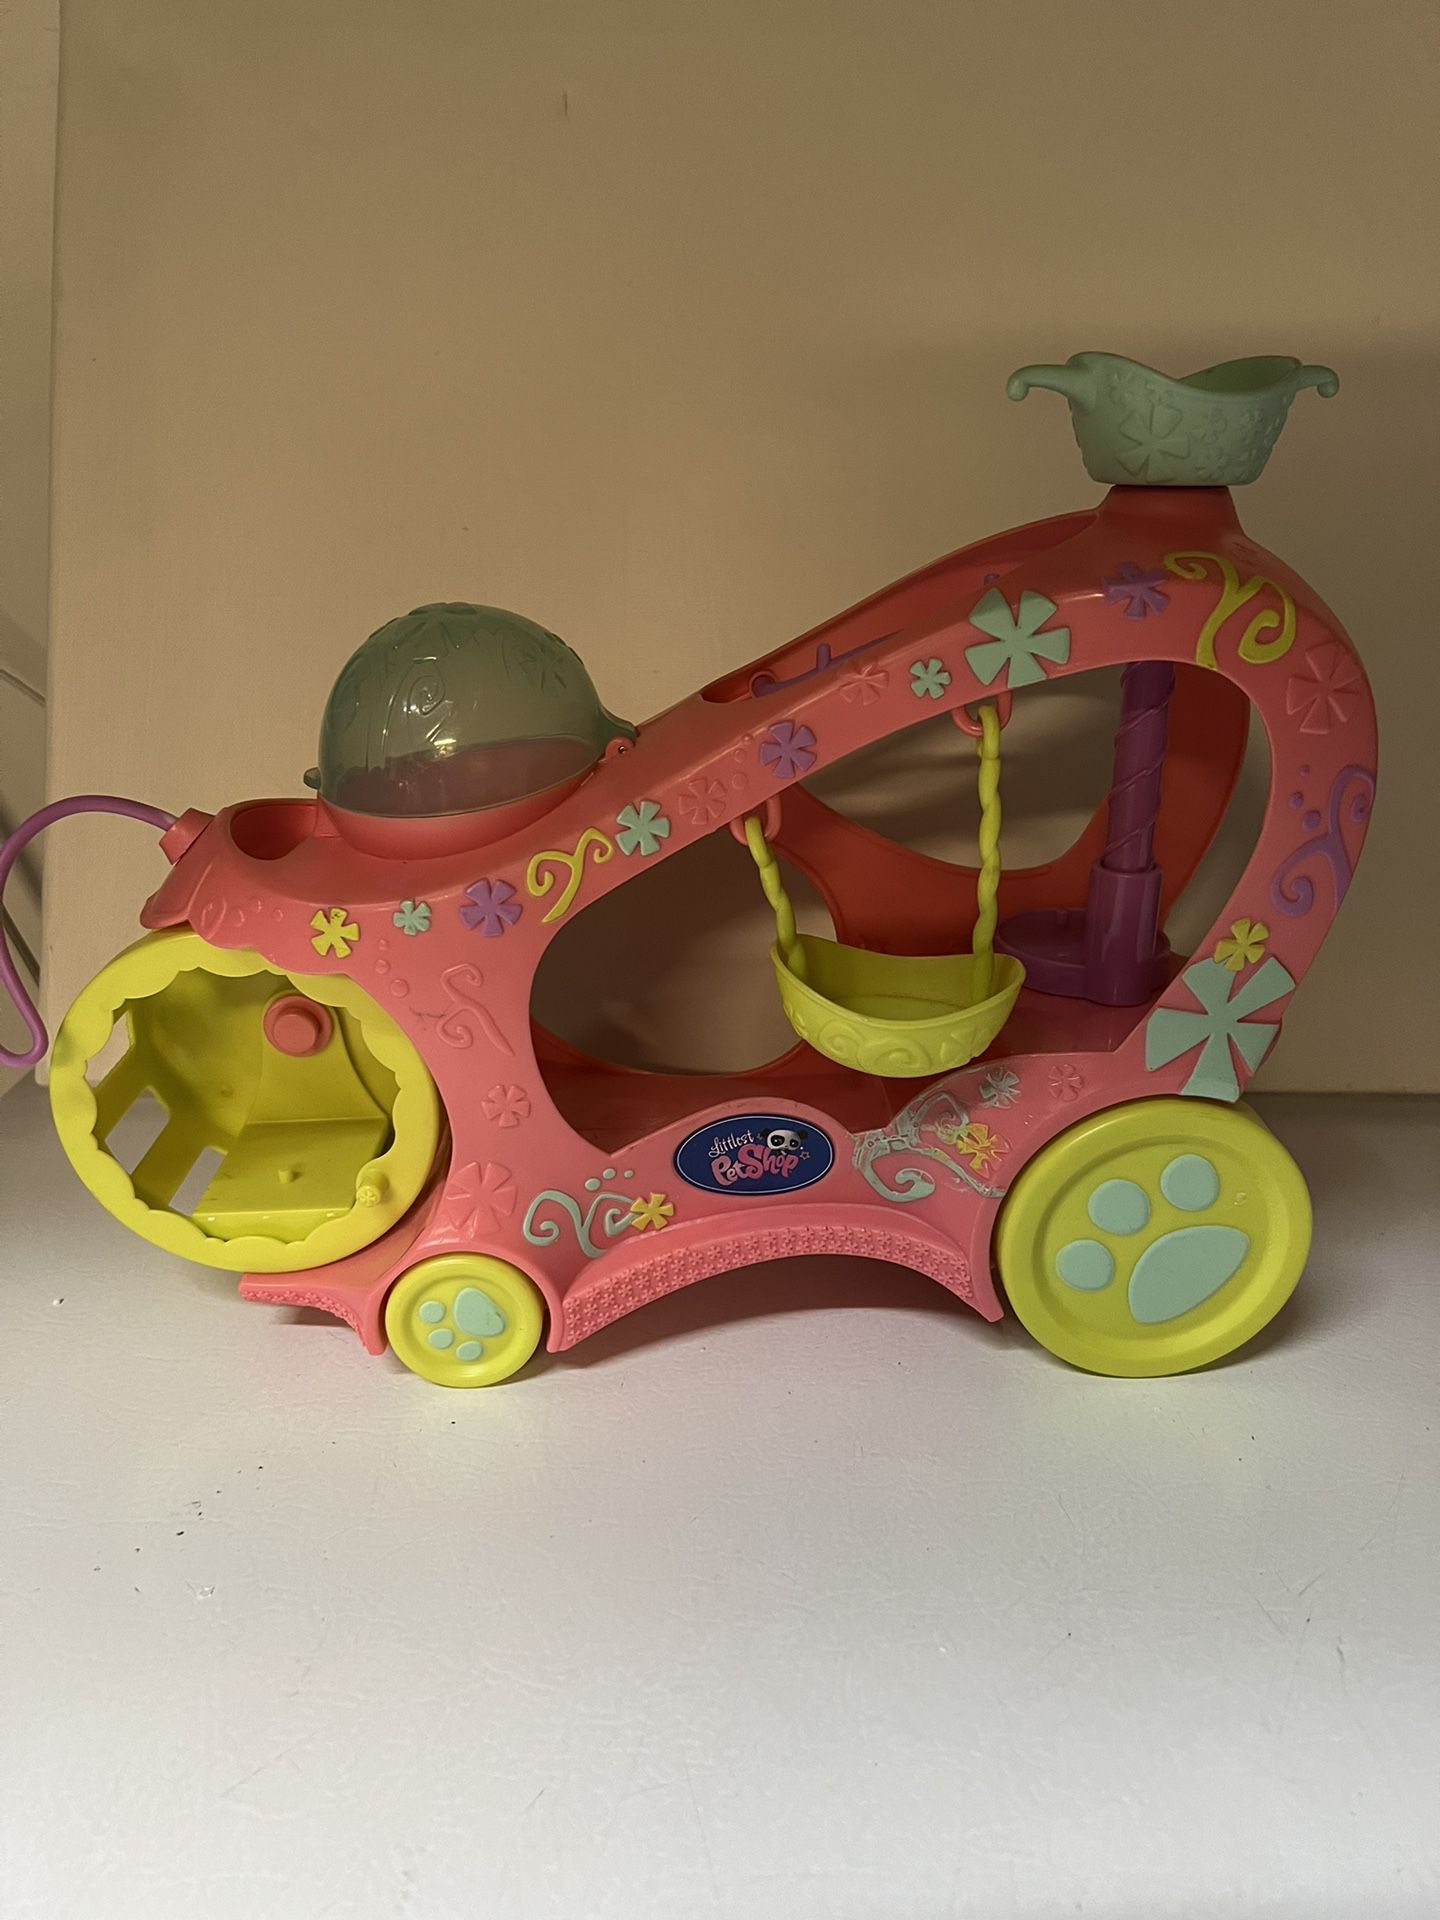 Lps House Littlest pet shop Swing Vehicle play set Lps toy